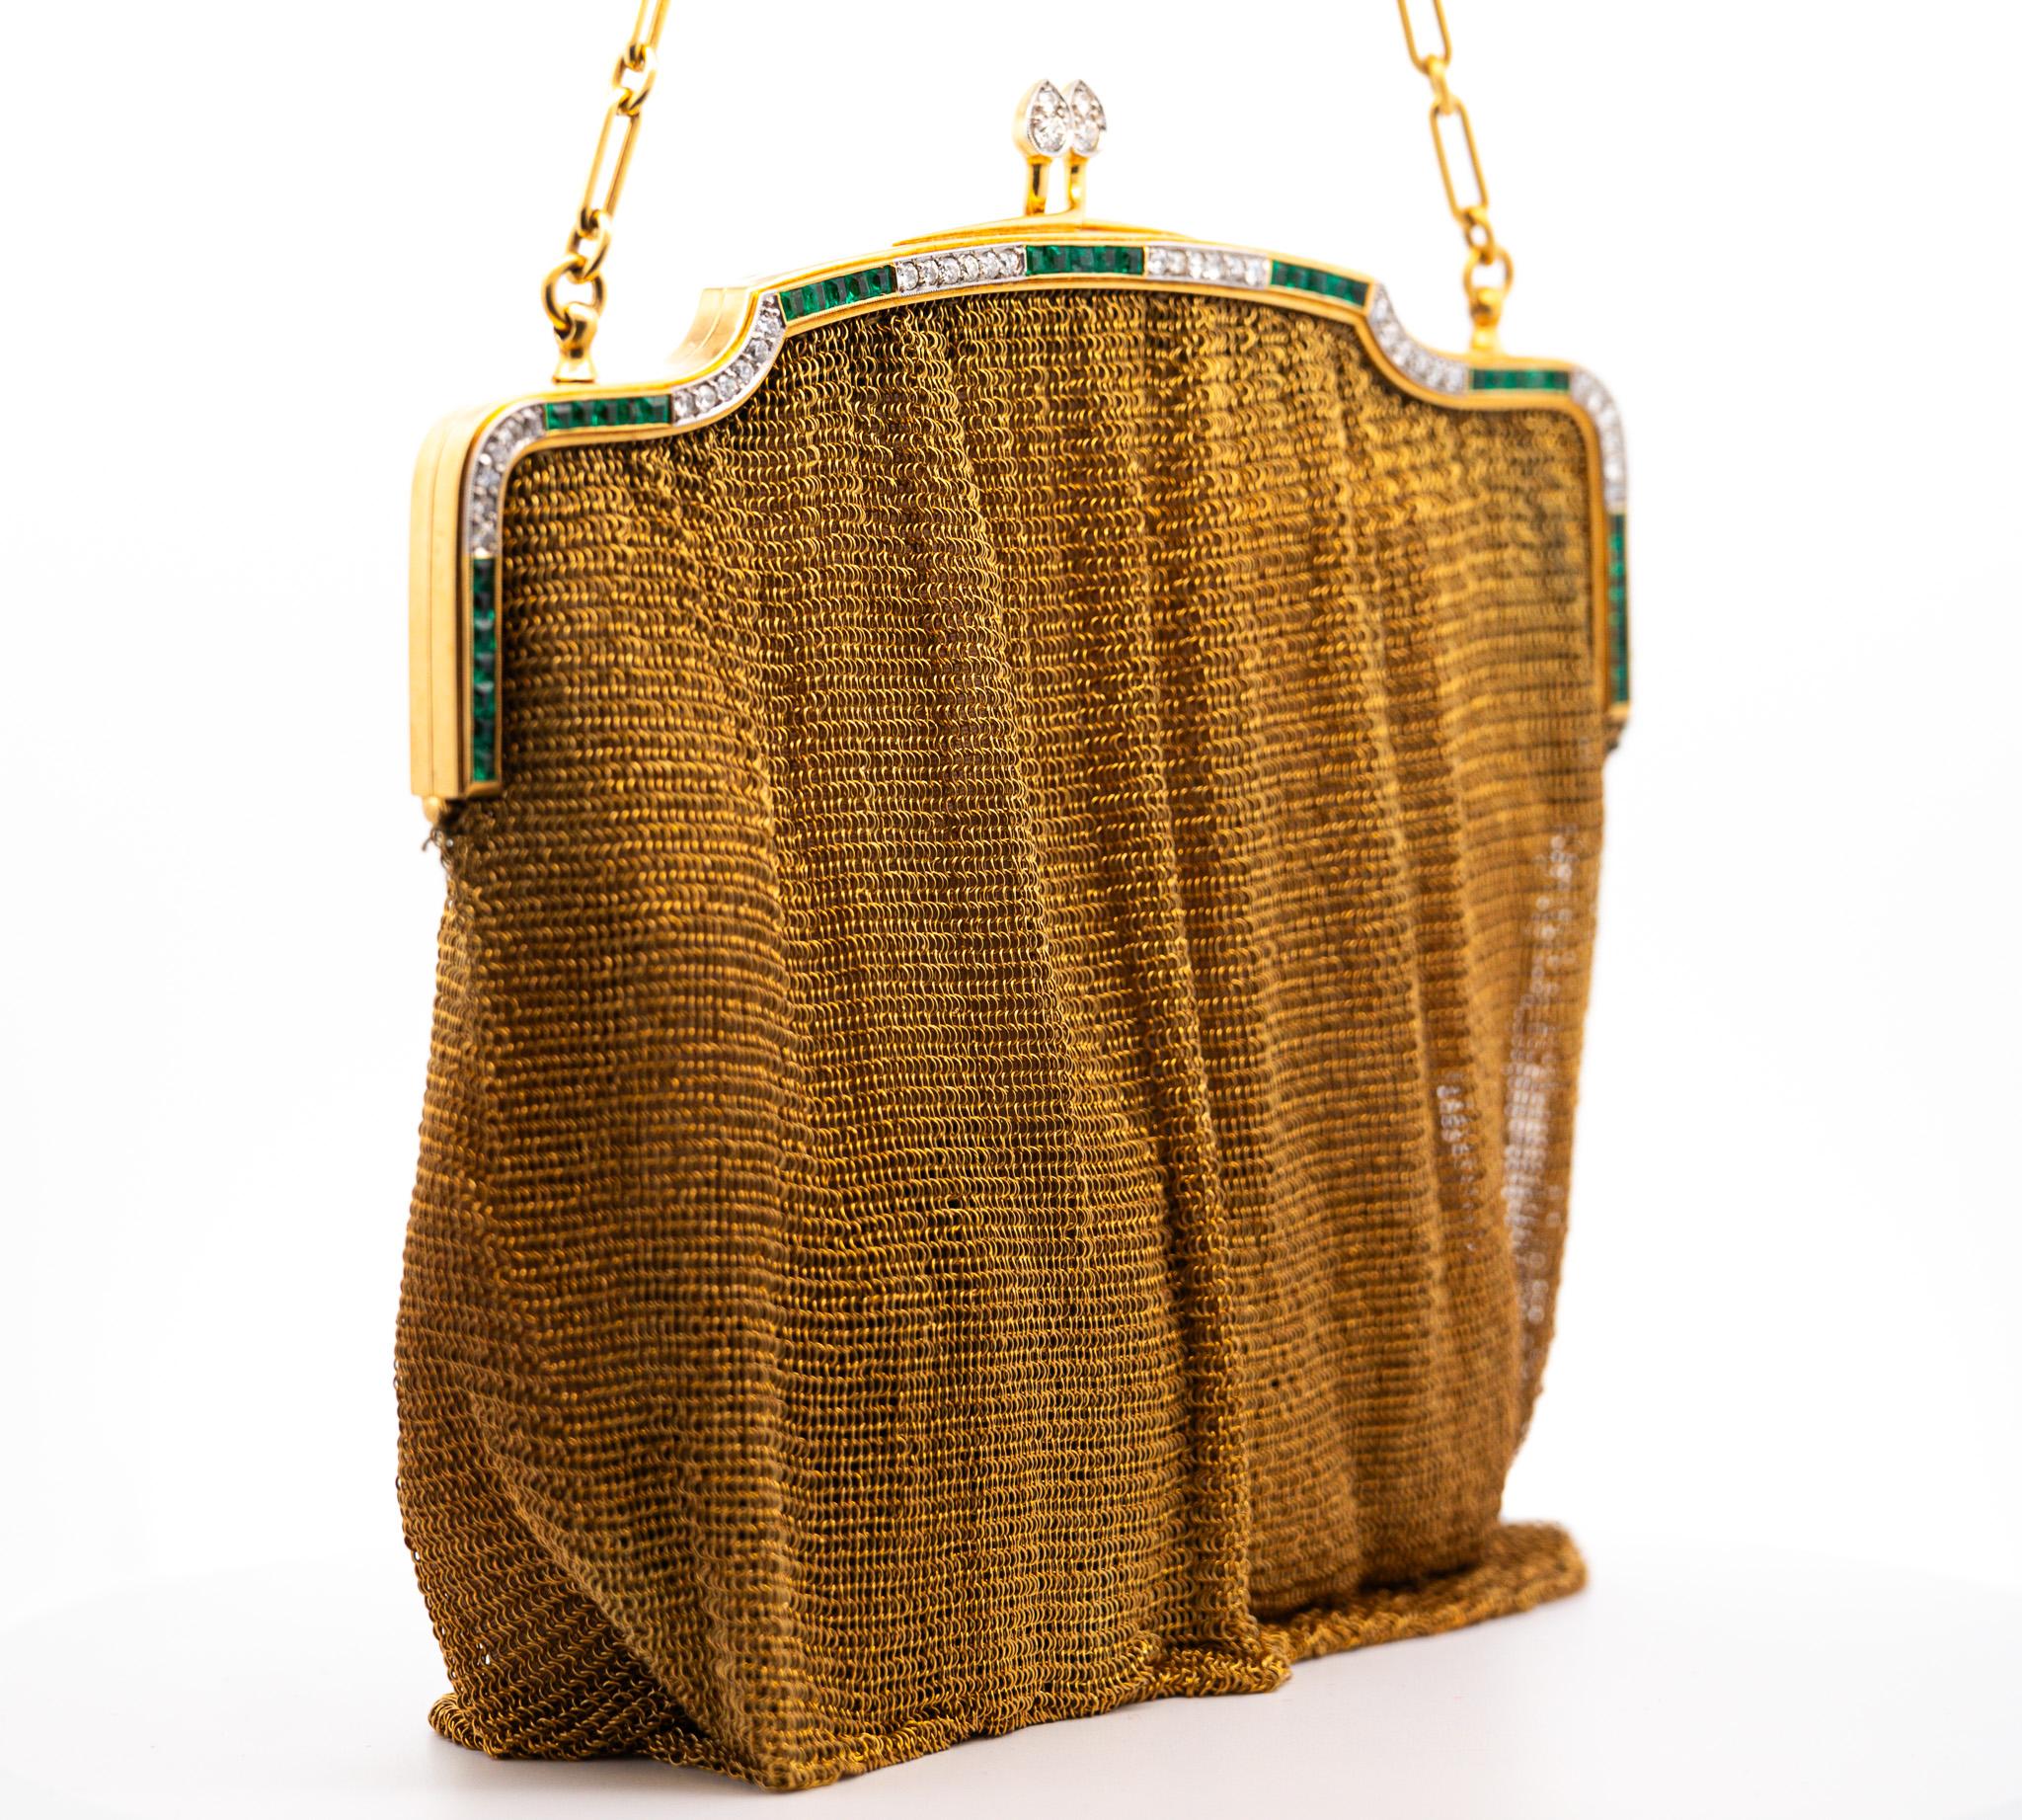 Offered is an exceedingly rare and coveted 18 Karat Gold Art Deco evening bag with a diamond and emerald frame. A testament to the opulent elegance of the early 20th century.

This vintage mesh purse hails from the 1920s to 1930s, showcasing an